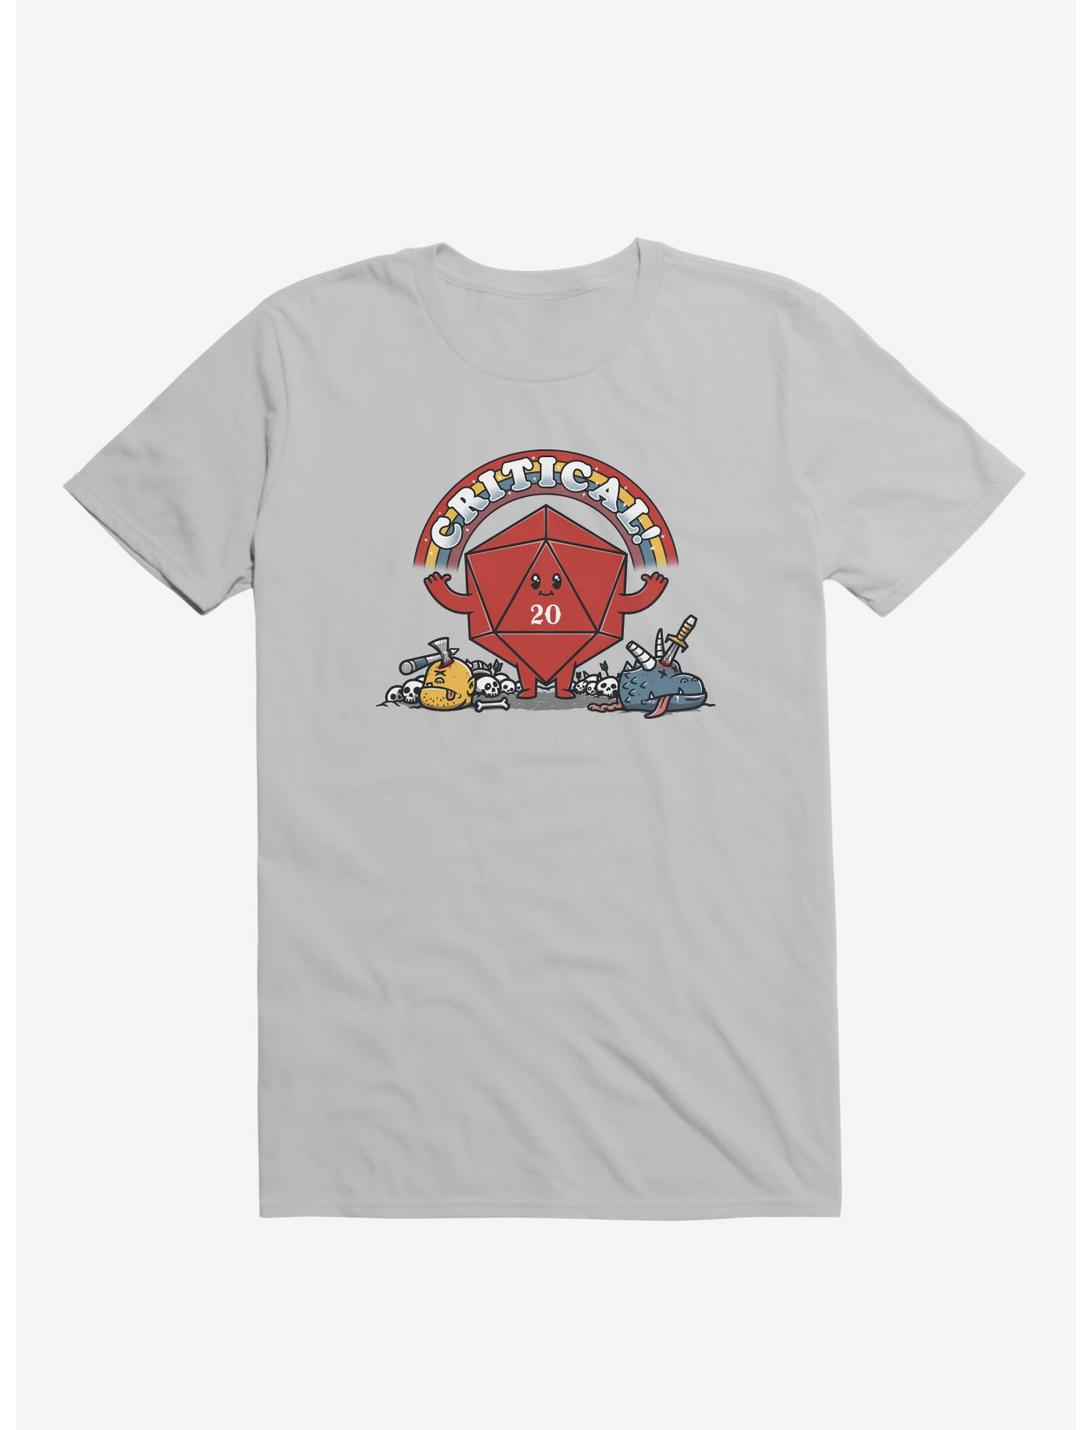 As Long As We Have Our Imagination! T-Shirt, SILVER, hi-res